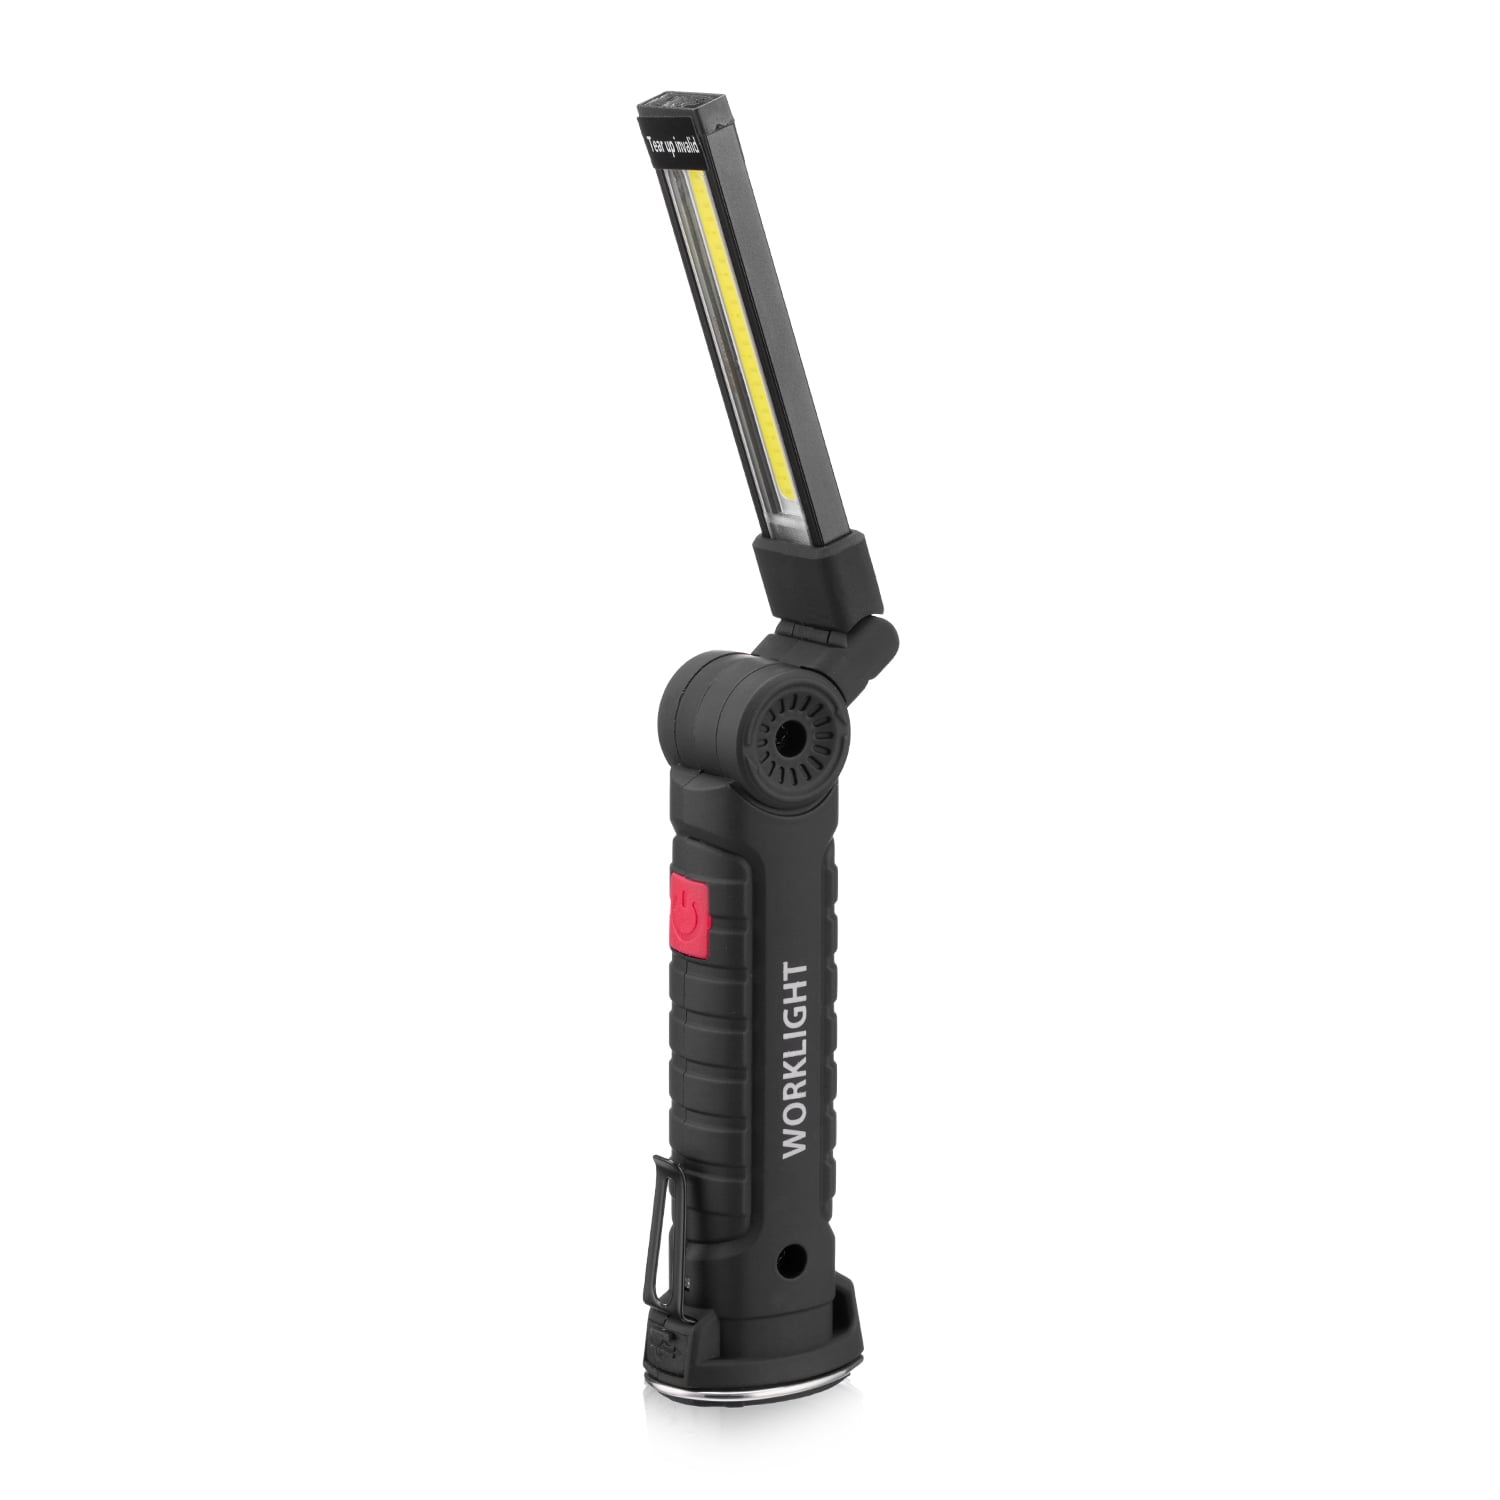 COB LED Magnetic Work Light Rechargeable Inspection Torch Lamp Cordless Durable 